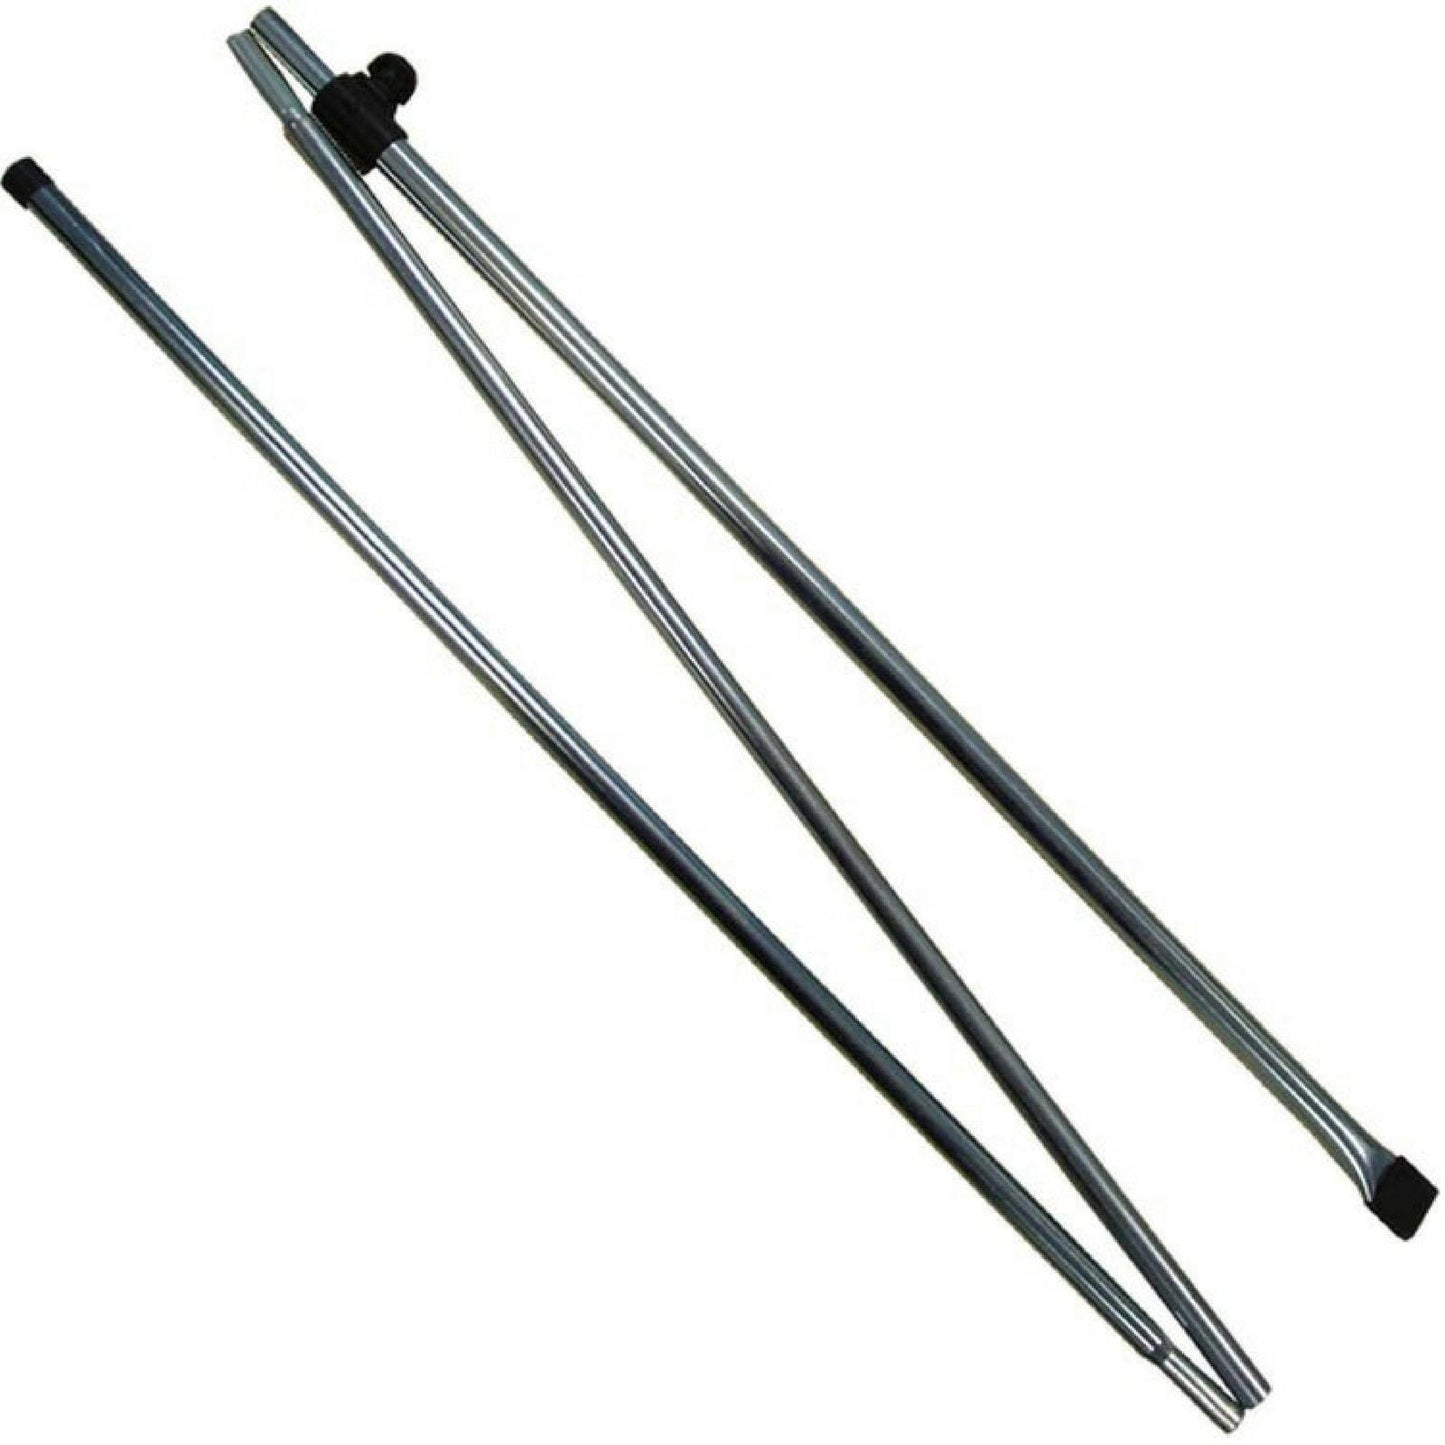 Outdoor Revolution Rear Pad Poles POL220 made by Outdoor Revolution. A Add-ons sold by Quality Caravan Awnings